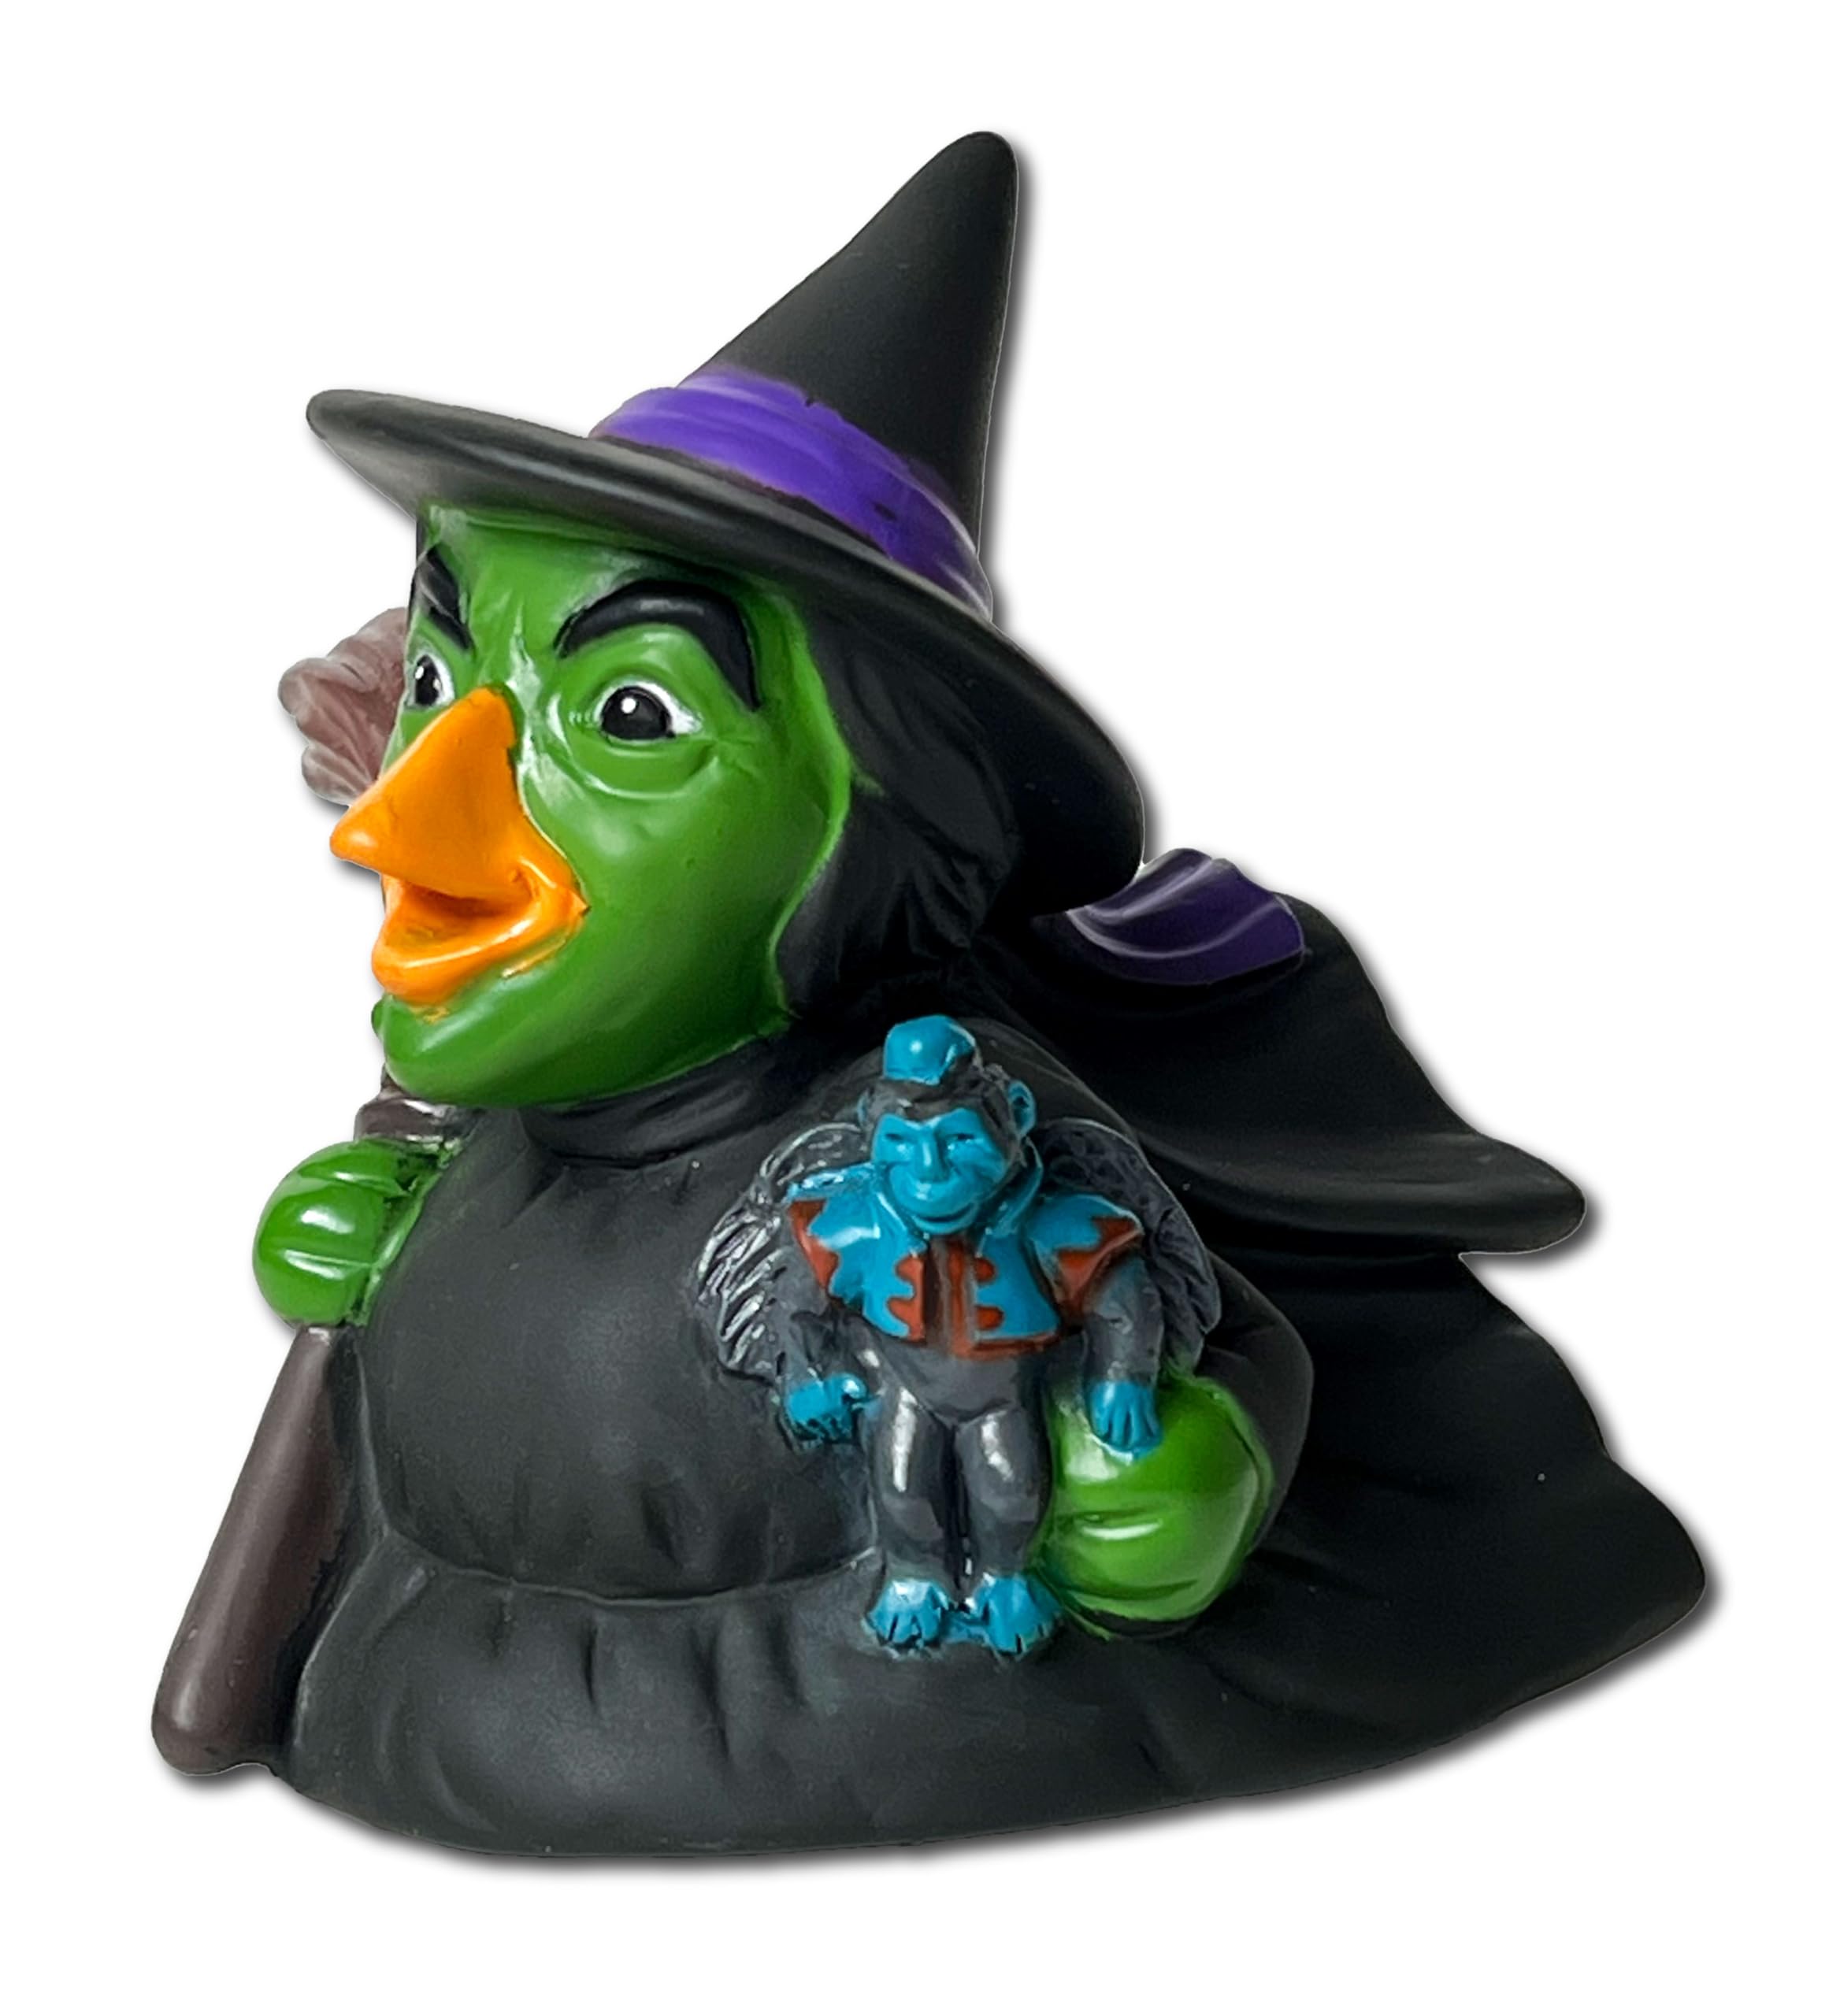 CelebriDucks - Wicked Witch - Floating Rubber Ducks - Collectible Bath Toy Gift for Kids & Adults of All Ages